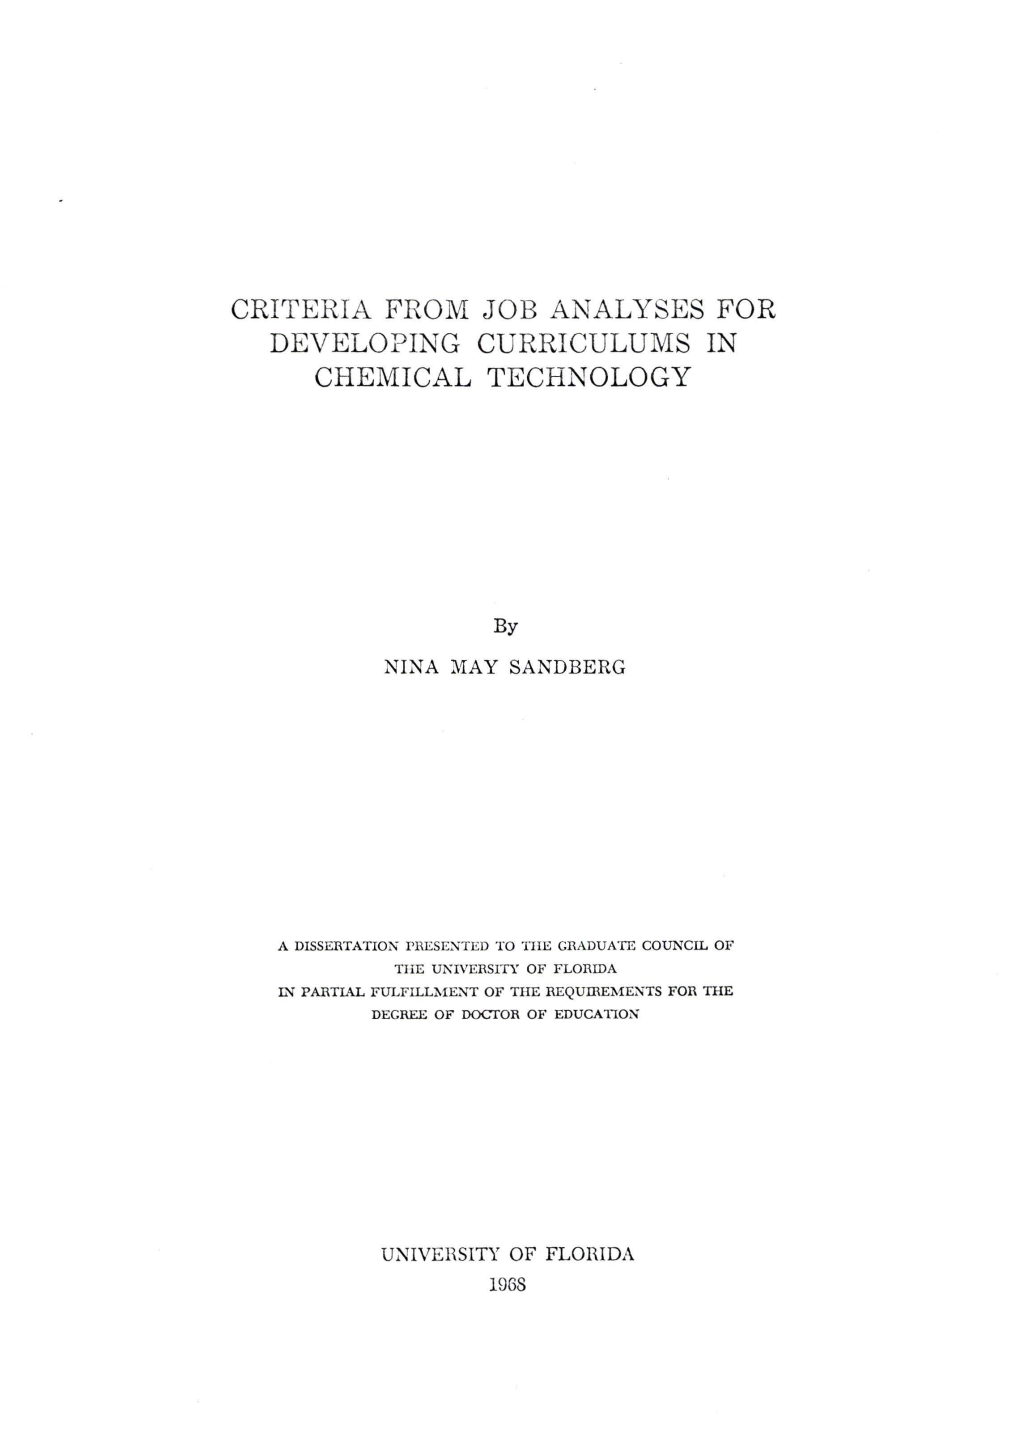 Criteria from Job Analyses for Developing Curriculums in Chemical Technology